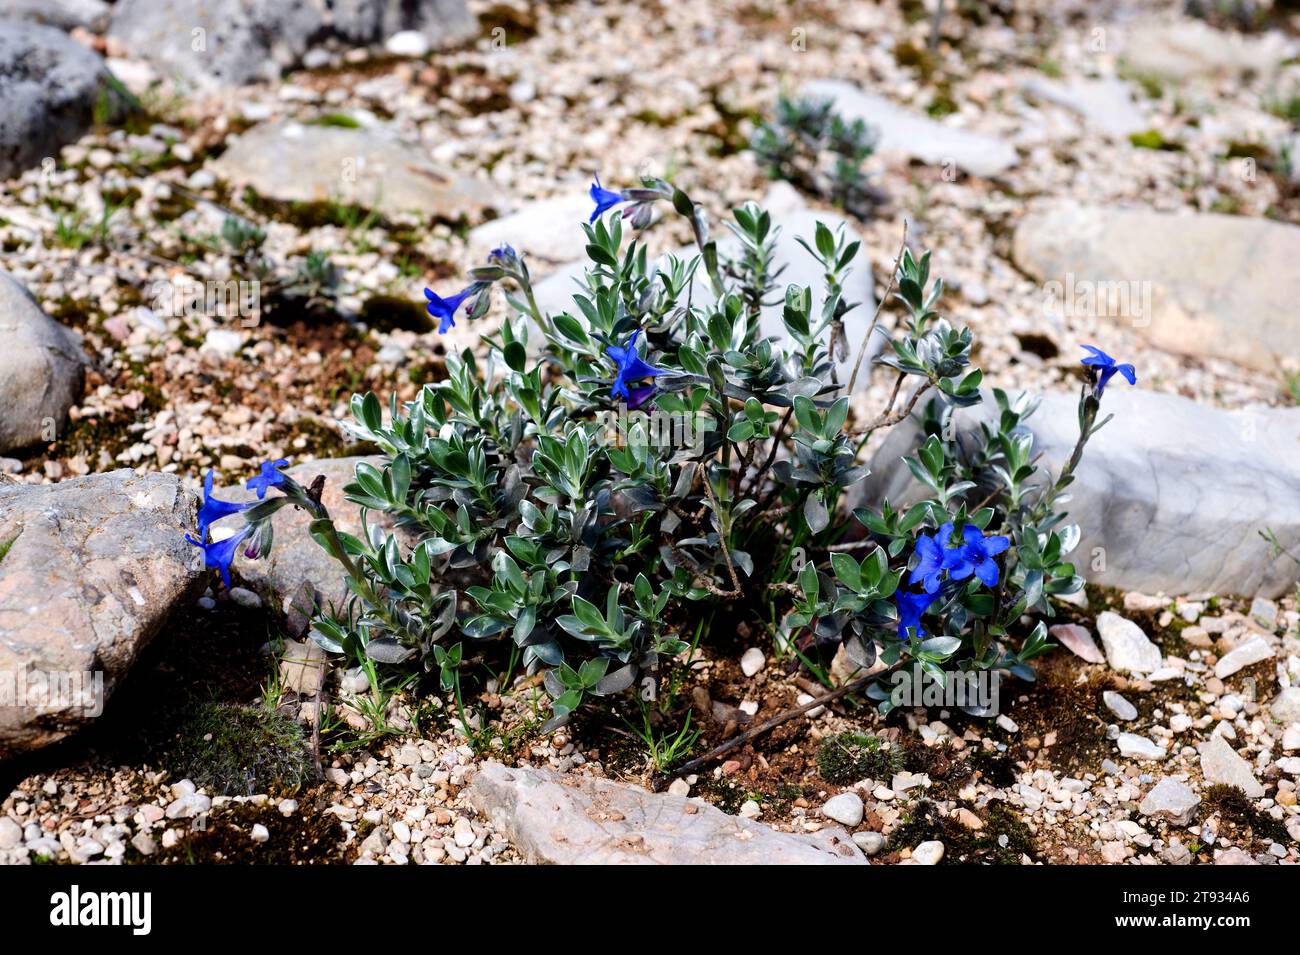 Viniebla azul (Lithodora nitida) is a little shrub endemic to some calcareous mountains of Andalusia, Spain. This photo was taken in Jaen province. Stock Photo